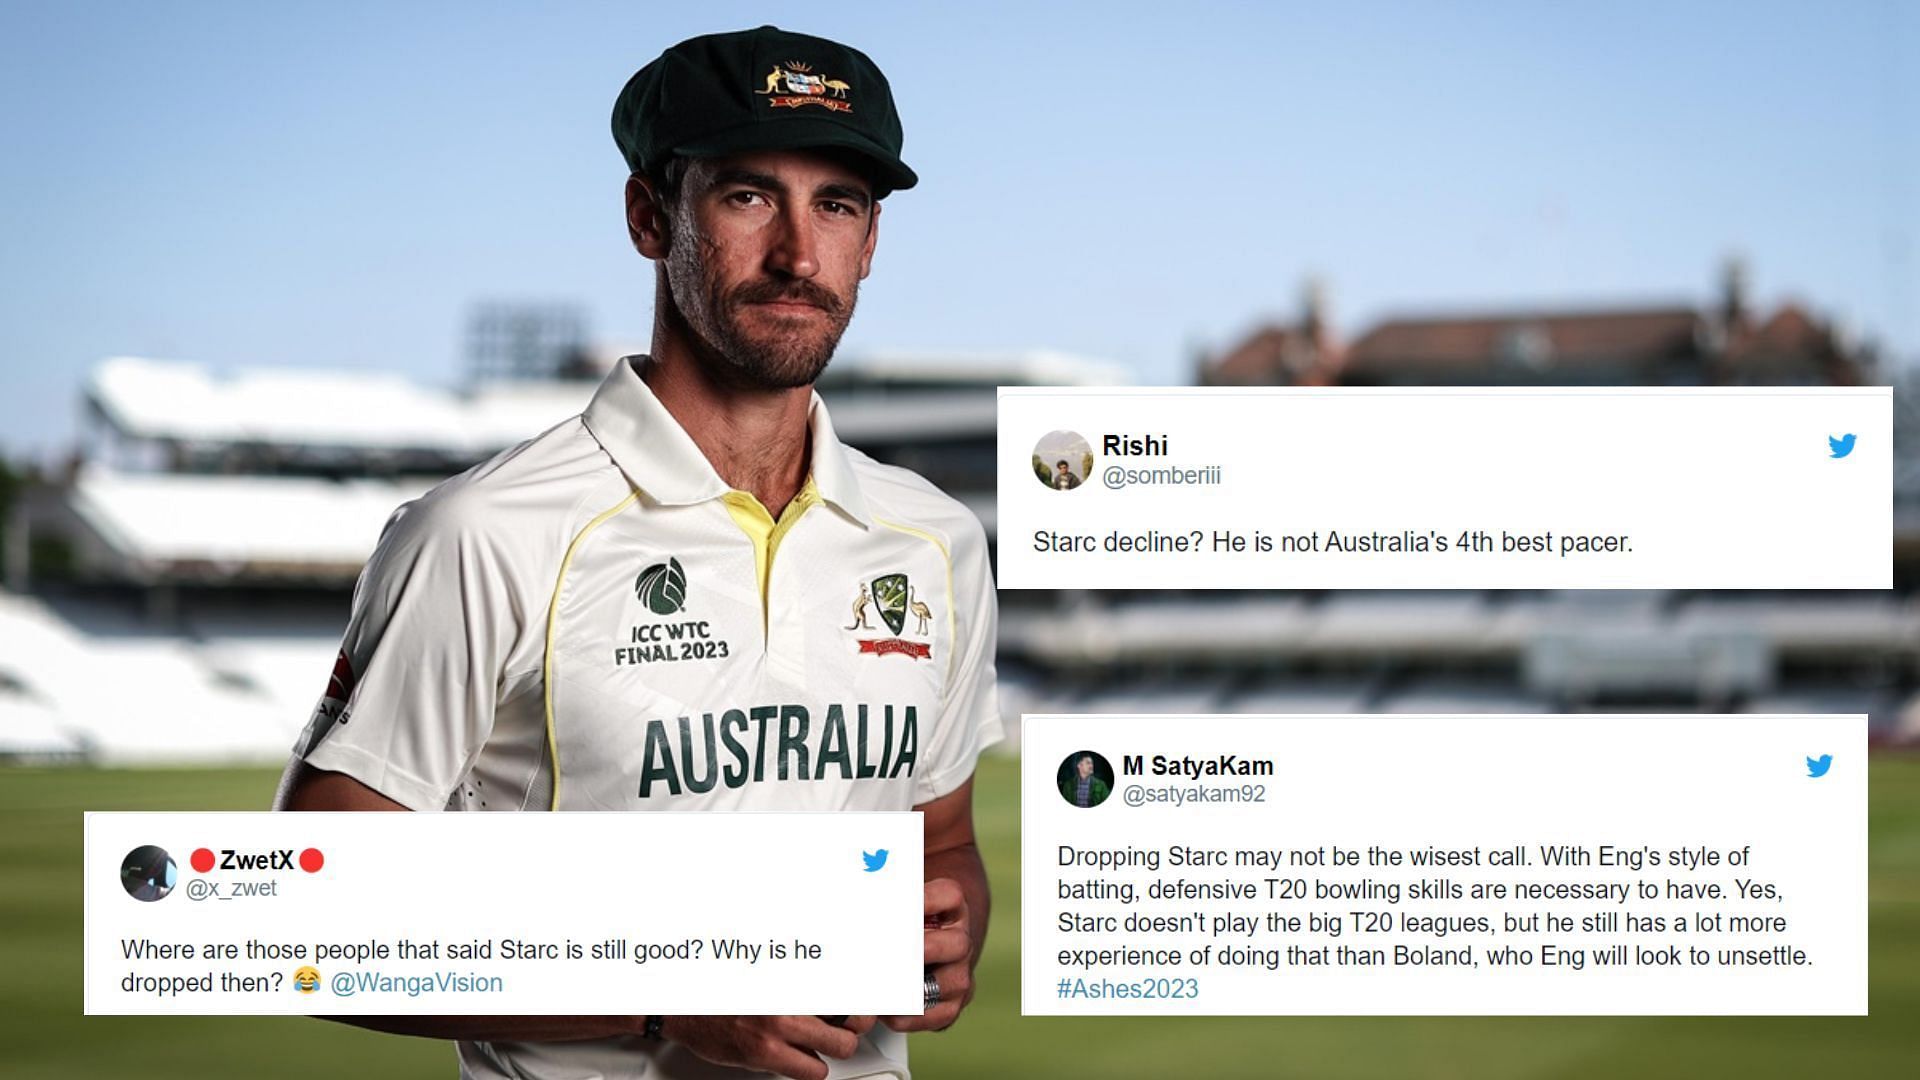 &quot;Lectures on why IPL was not his priority, all that for getting benched here&quot; - Twitterati polarized over Starc